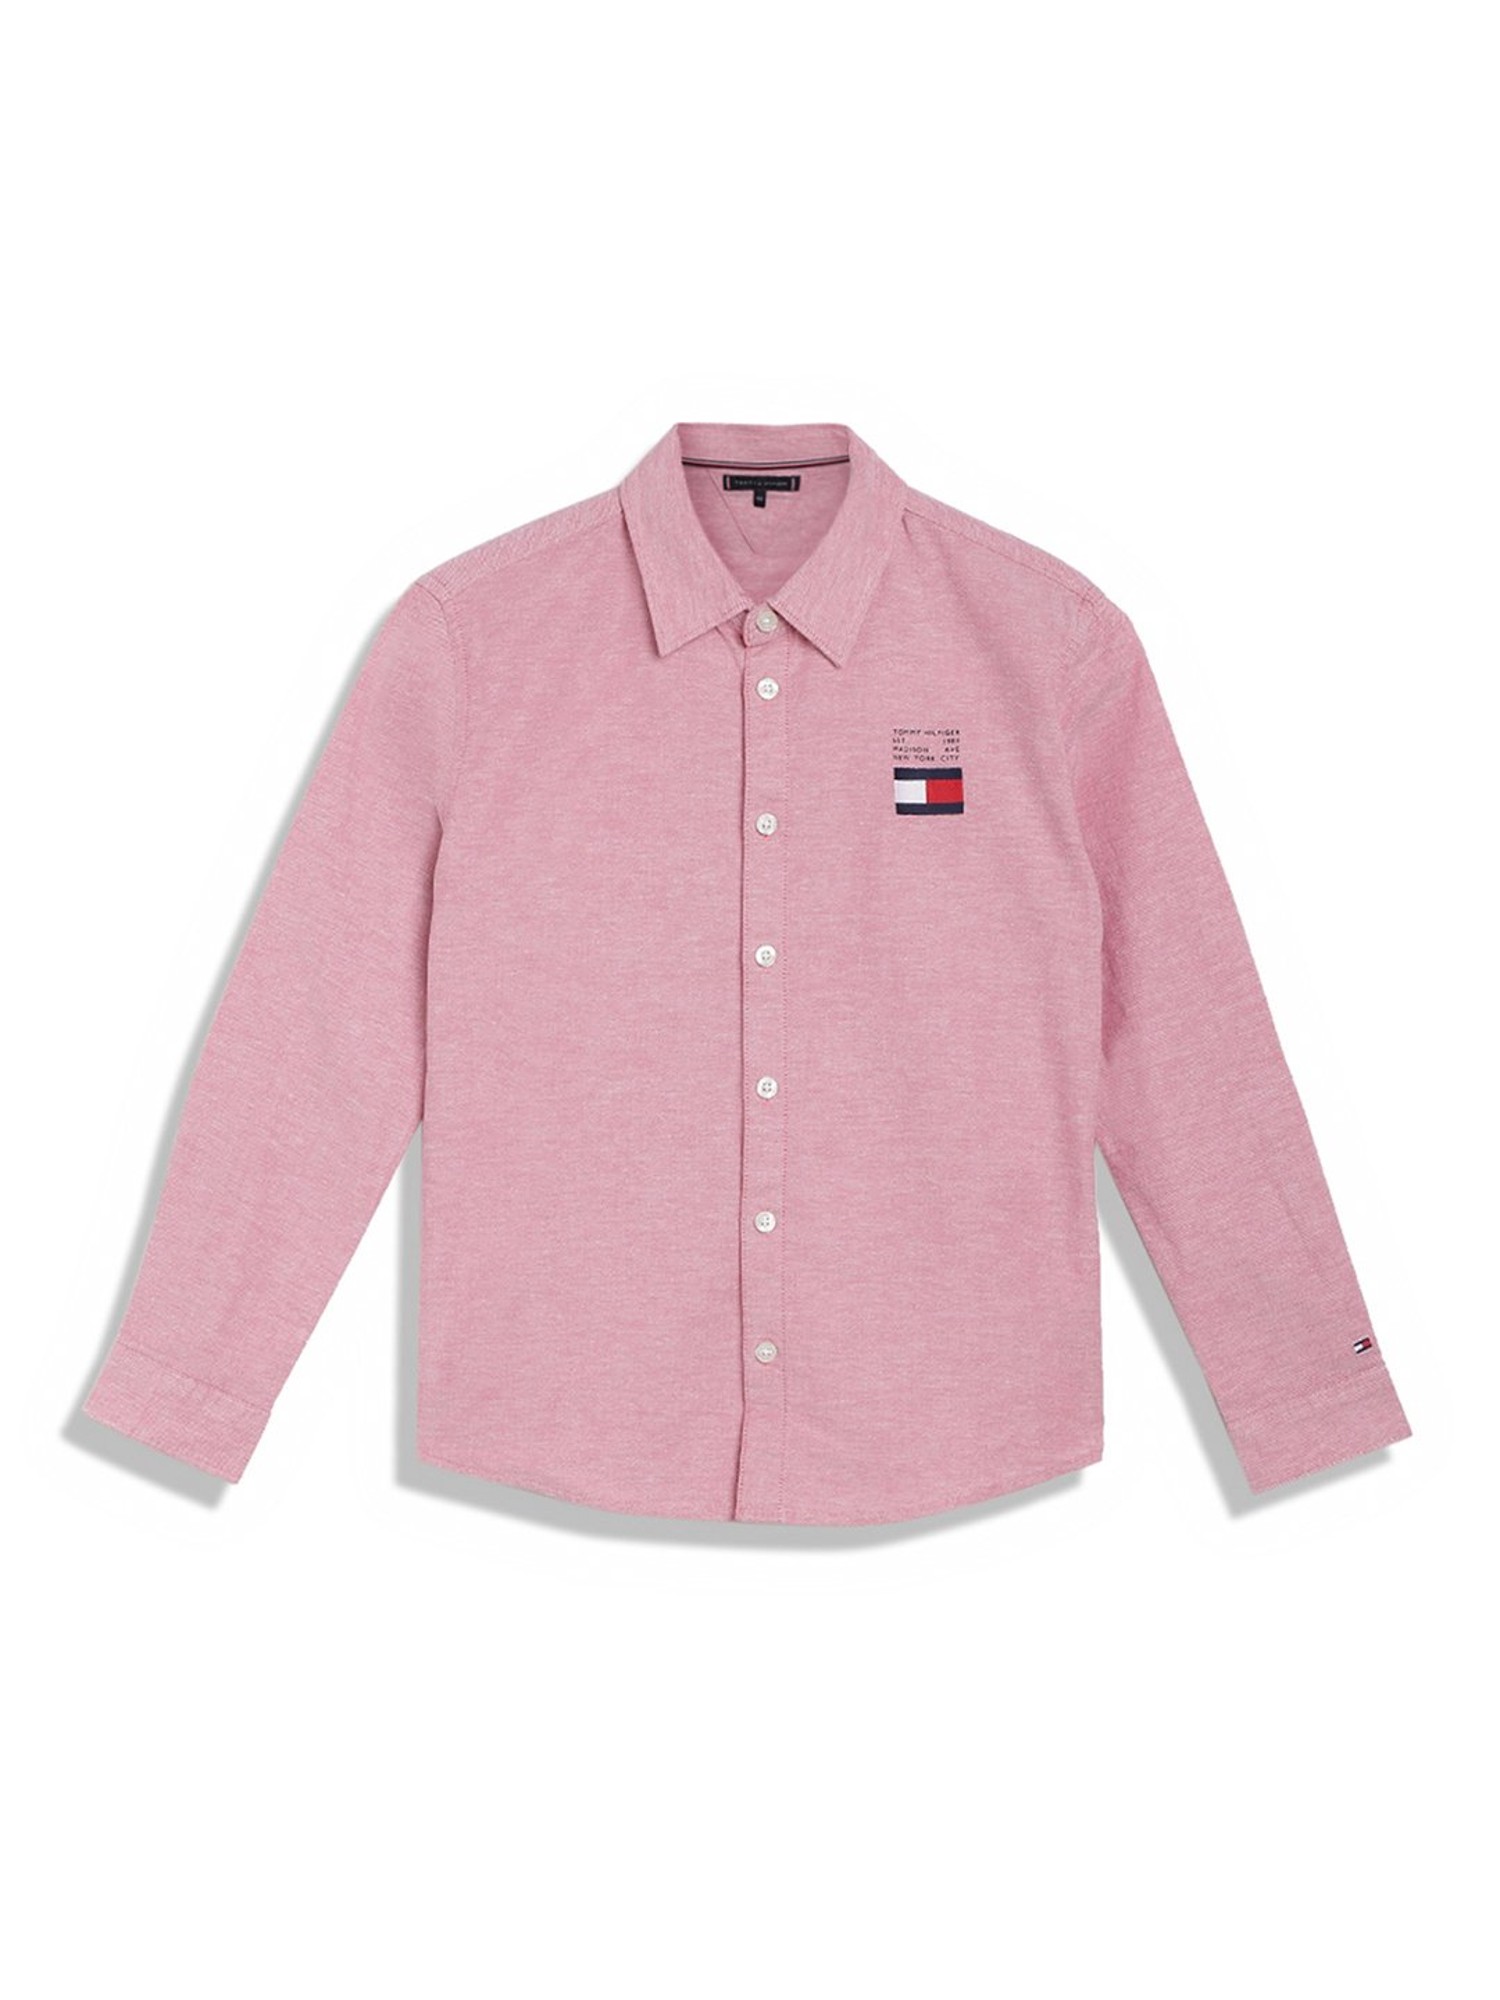 Hilfiger Pink Shirt Tommy Kids Full Solid Sleeves